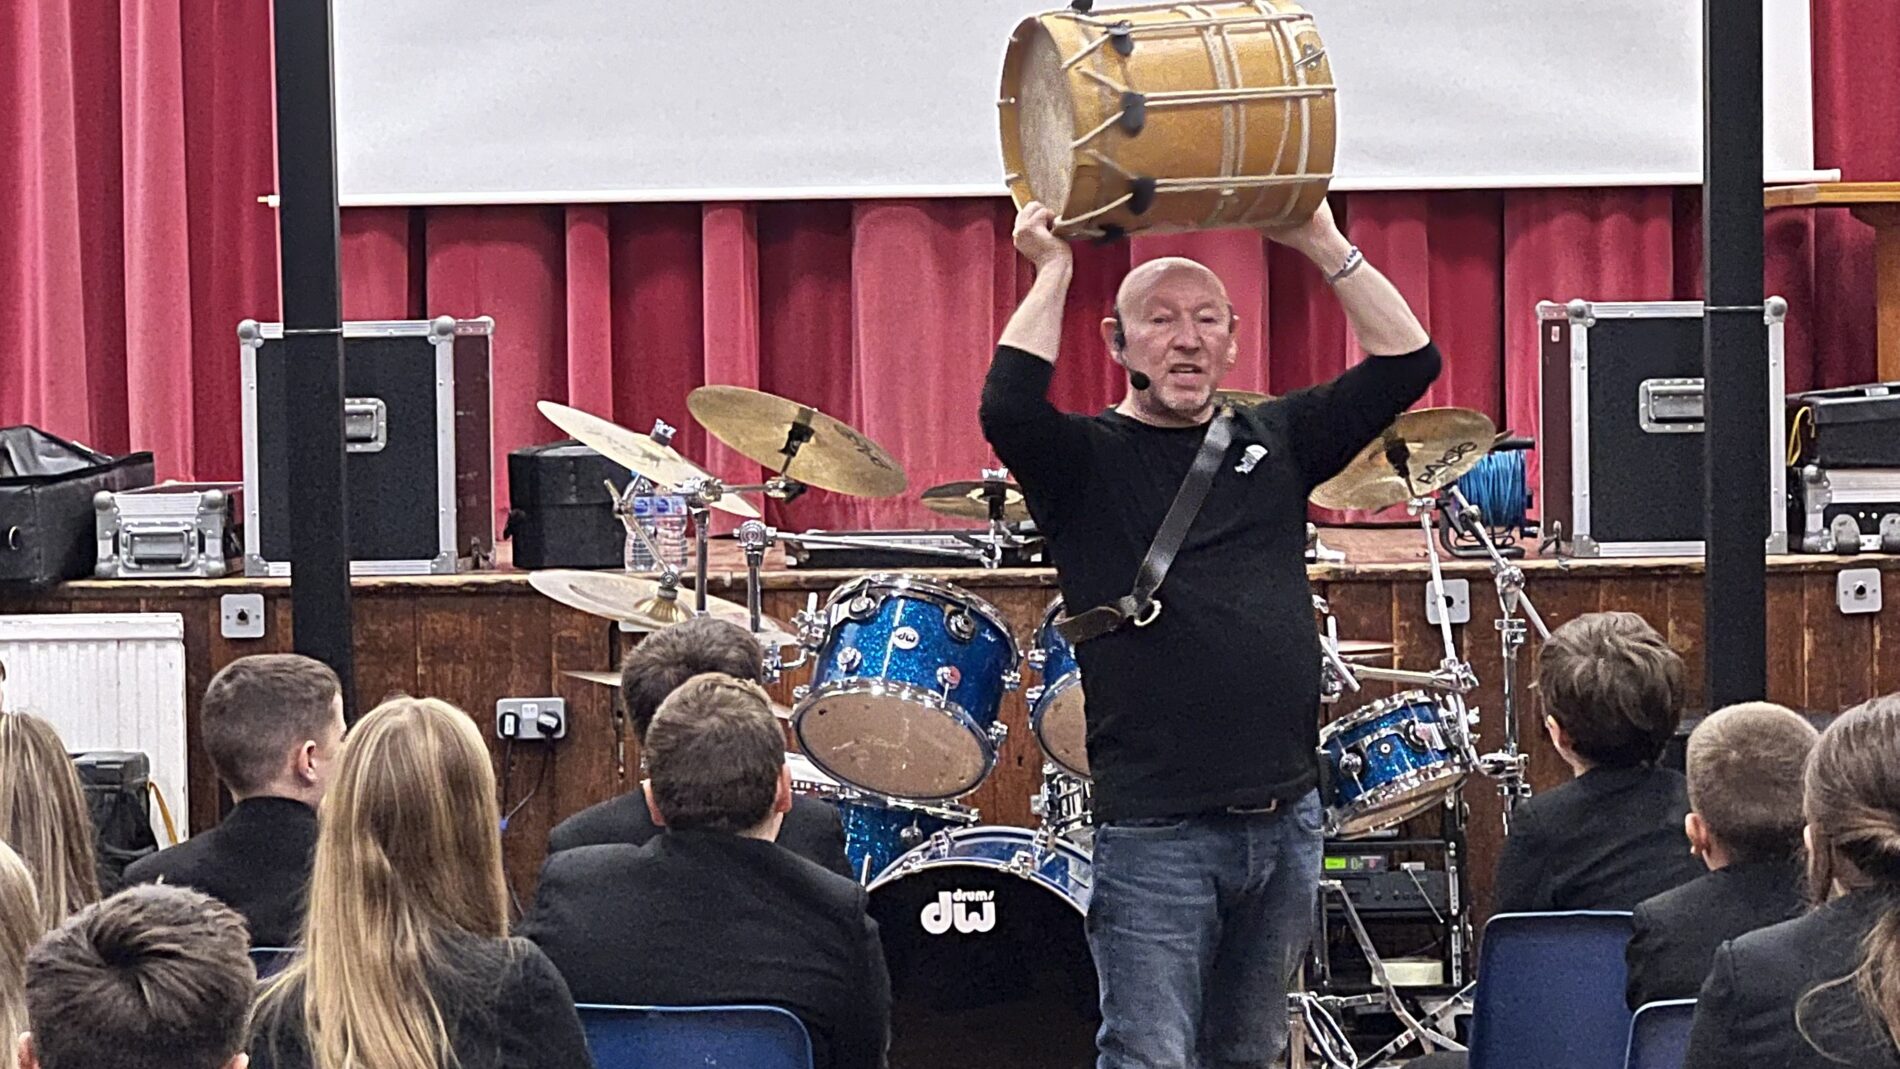 Jeff Rich showing a African style drum